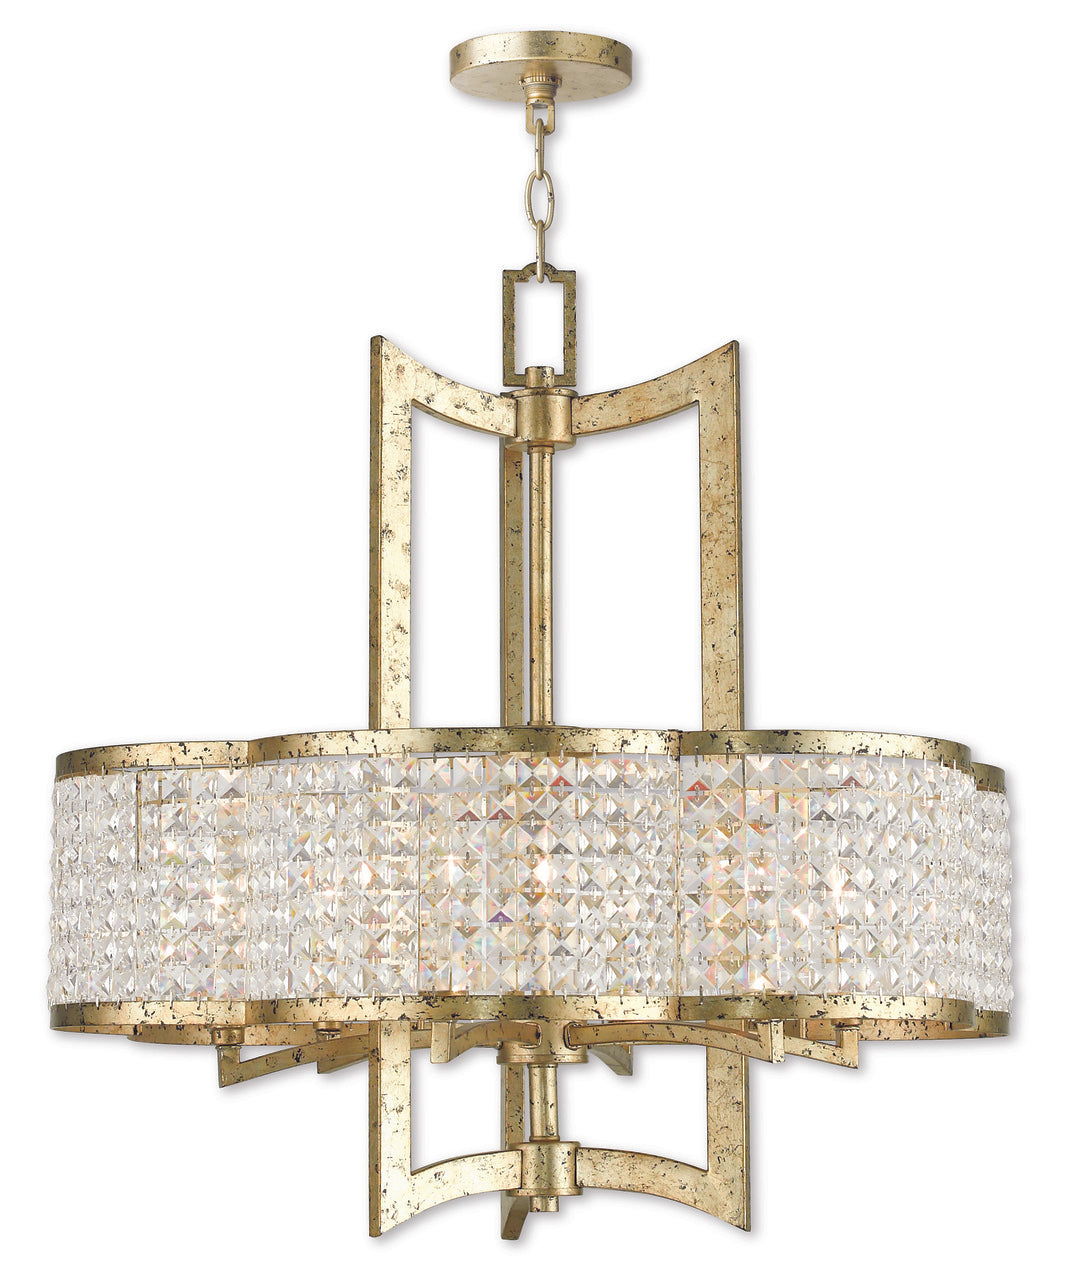 LIVEX Lighting 50576-28 Grammercy Chandelier with Hand-Applied Winter Gold (6 Light)